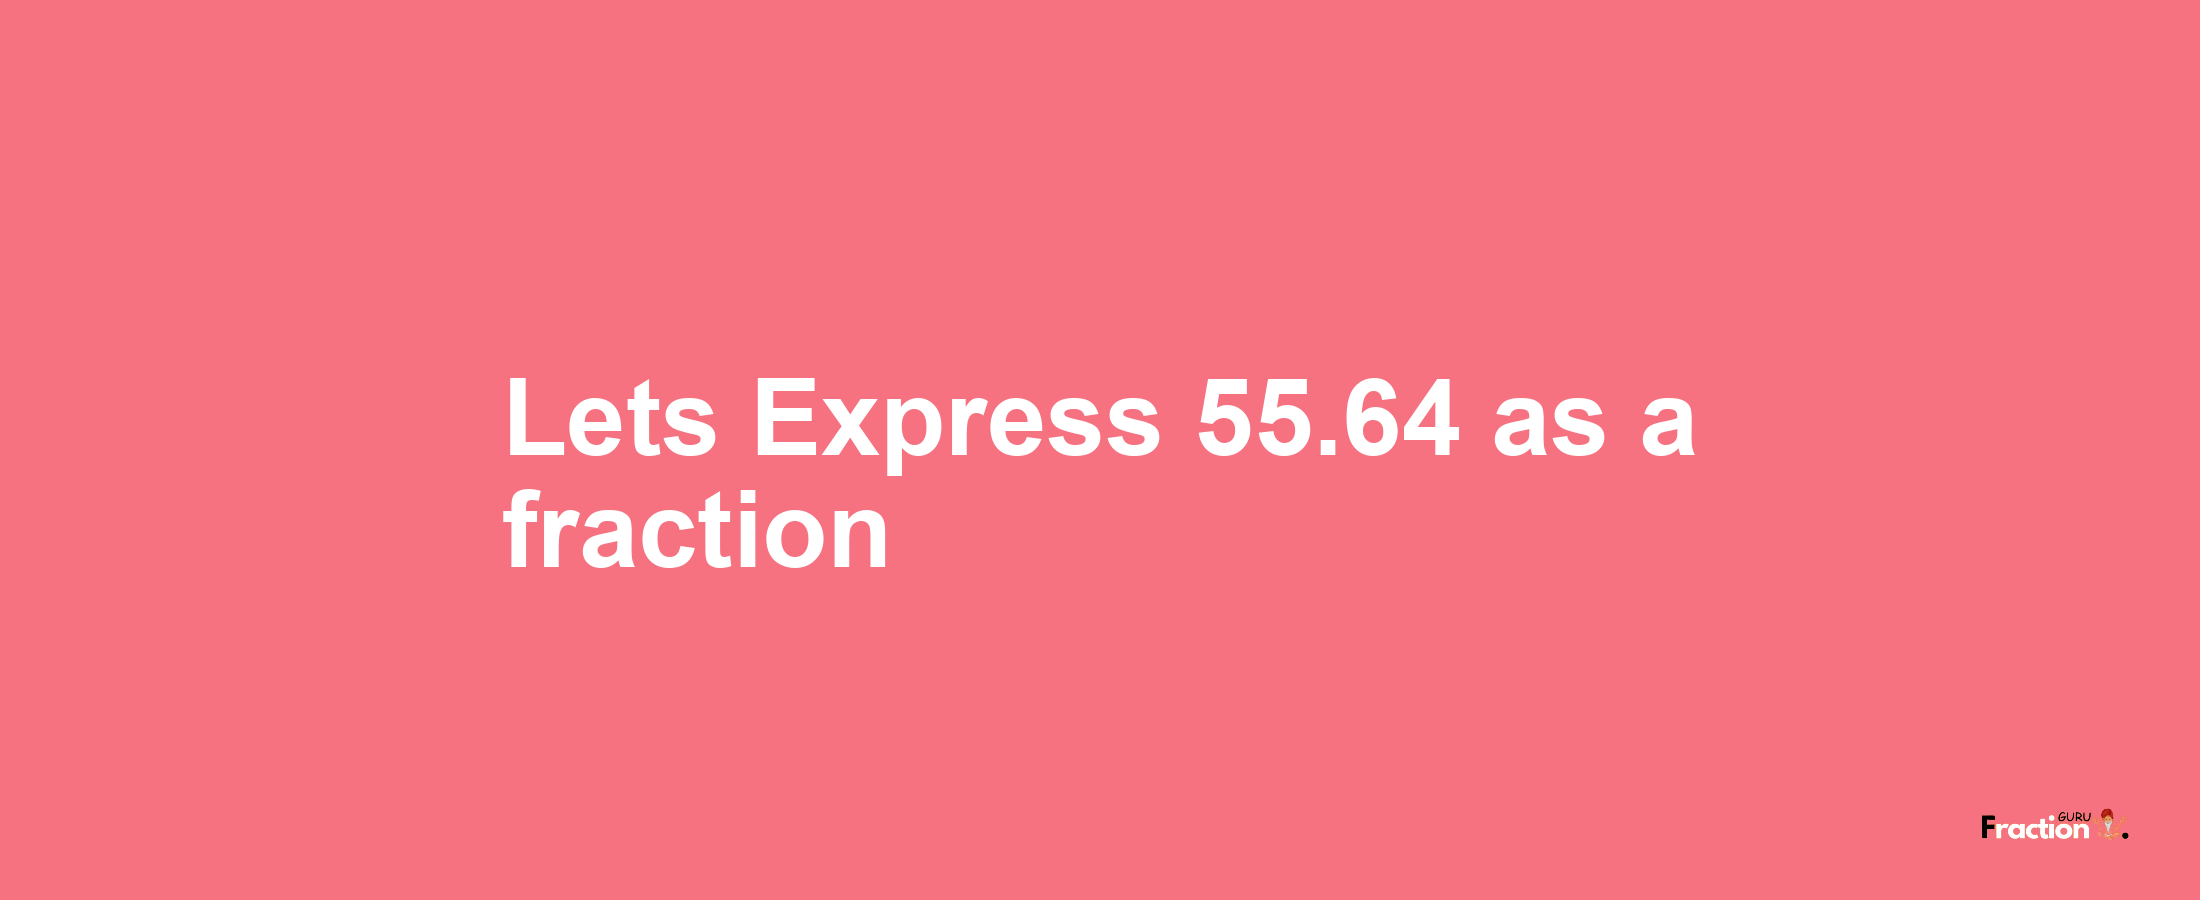 Lets Express 55.64 as afraction